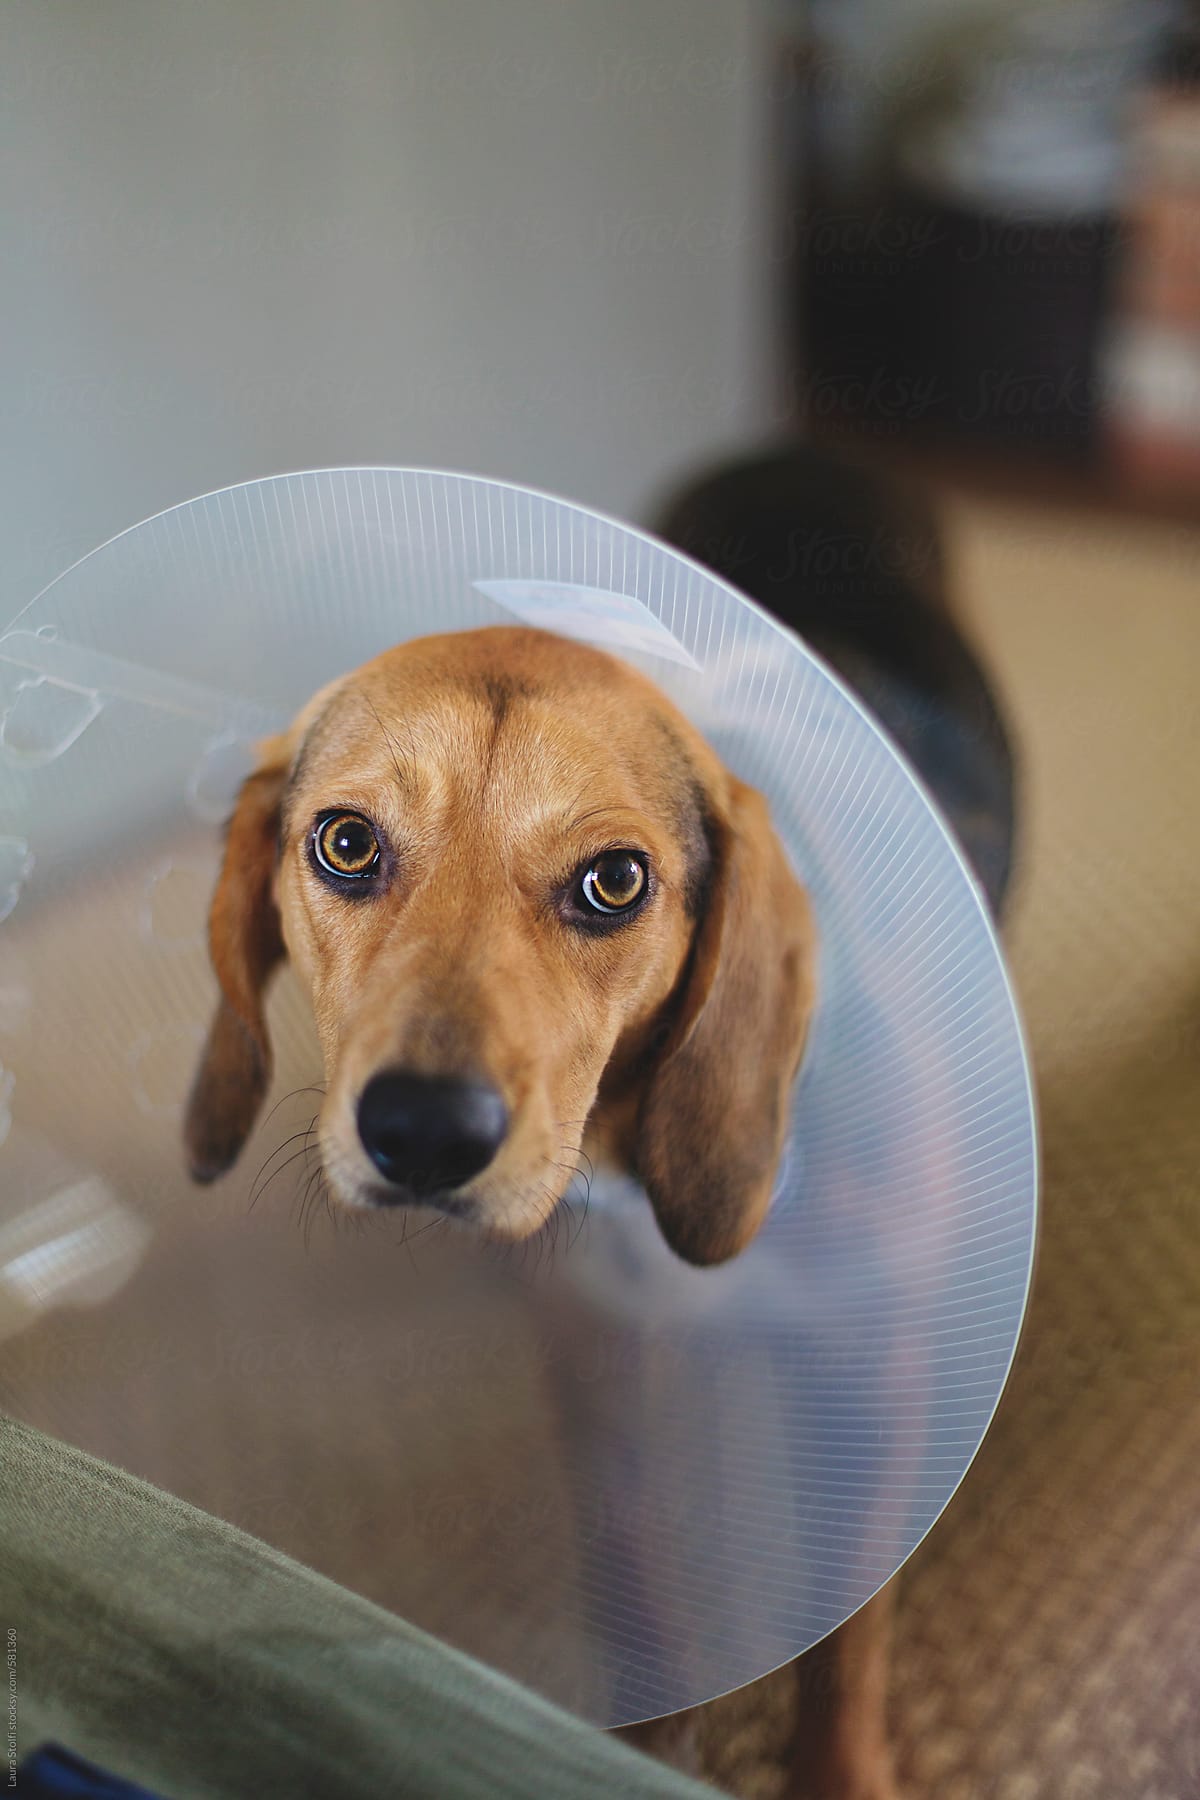 A beautiful dog is sad and upset because she has to wear elizabethan collar